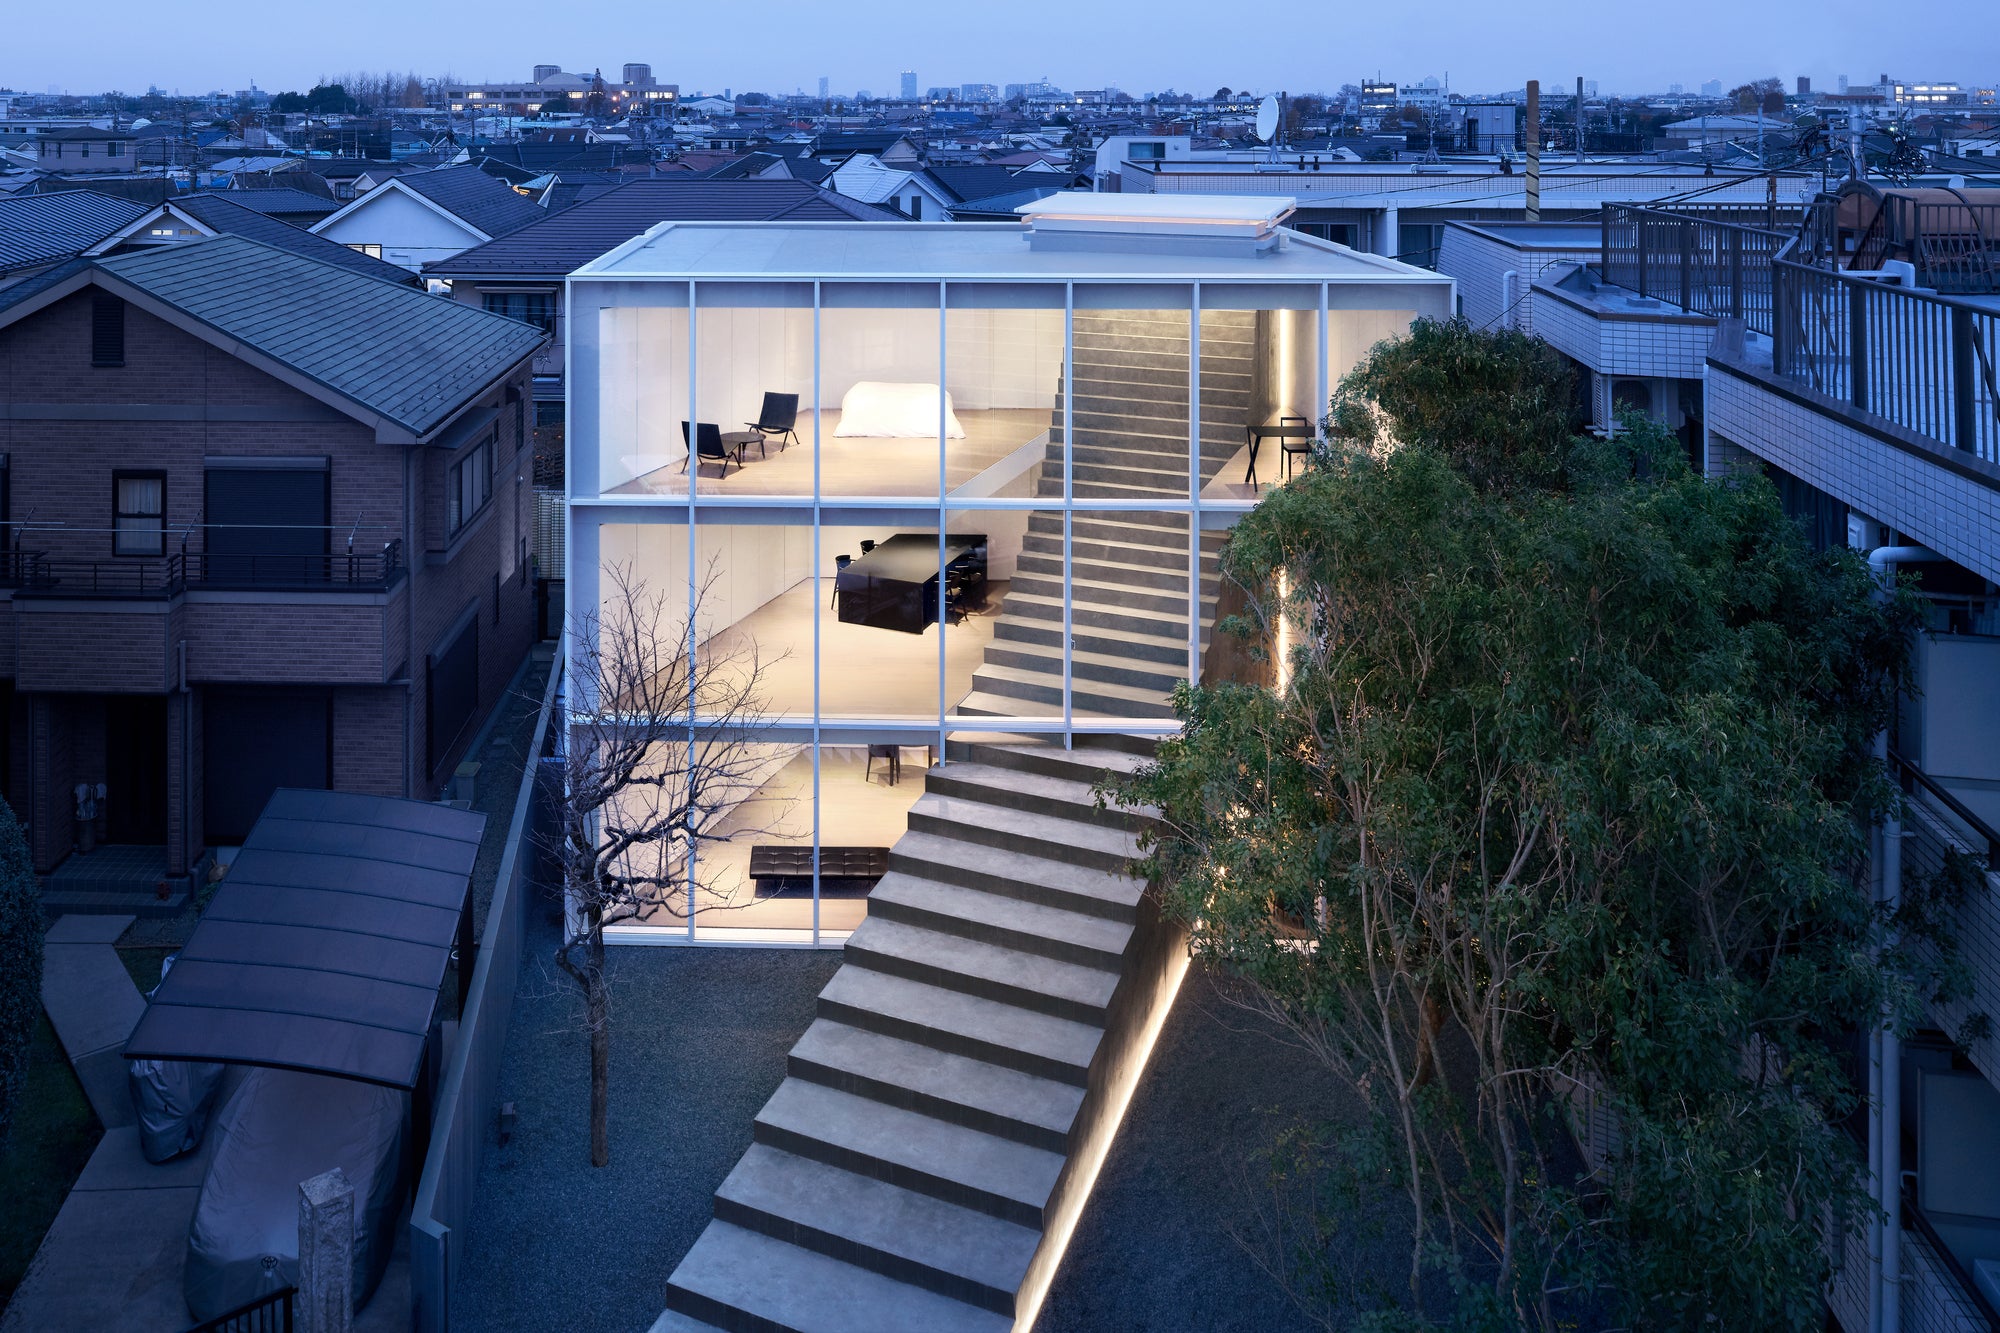 A Gigantic Staircase Cuts Through The Heart Of Nendo's Stairway House